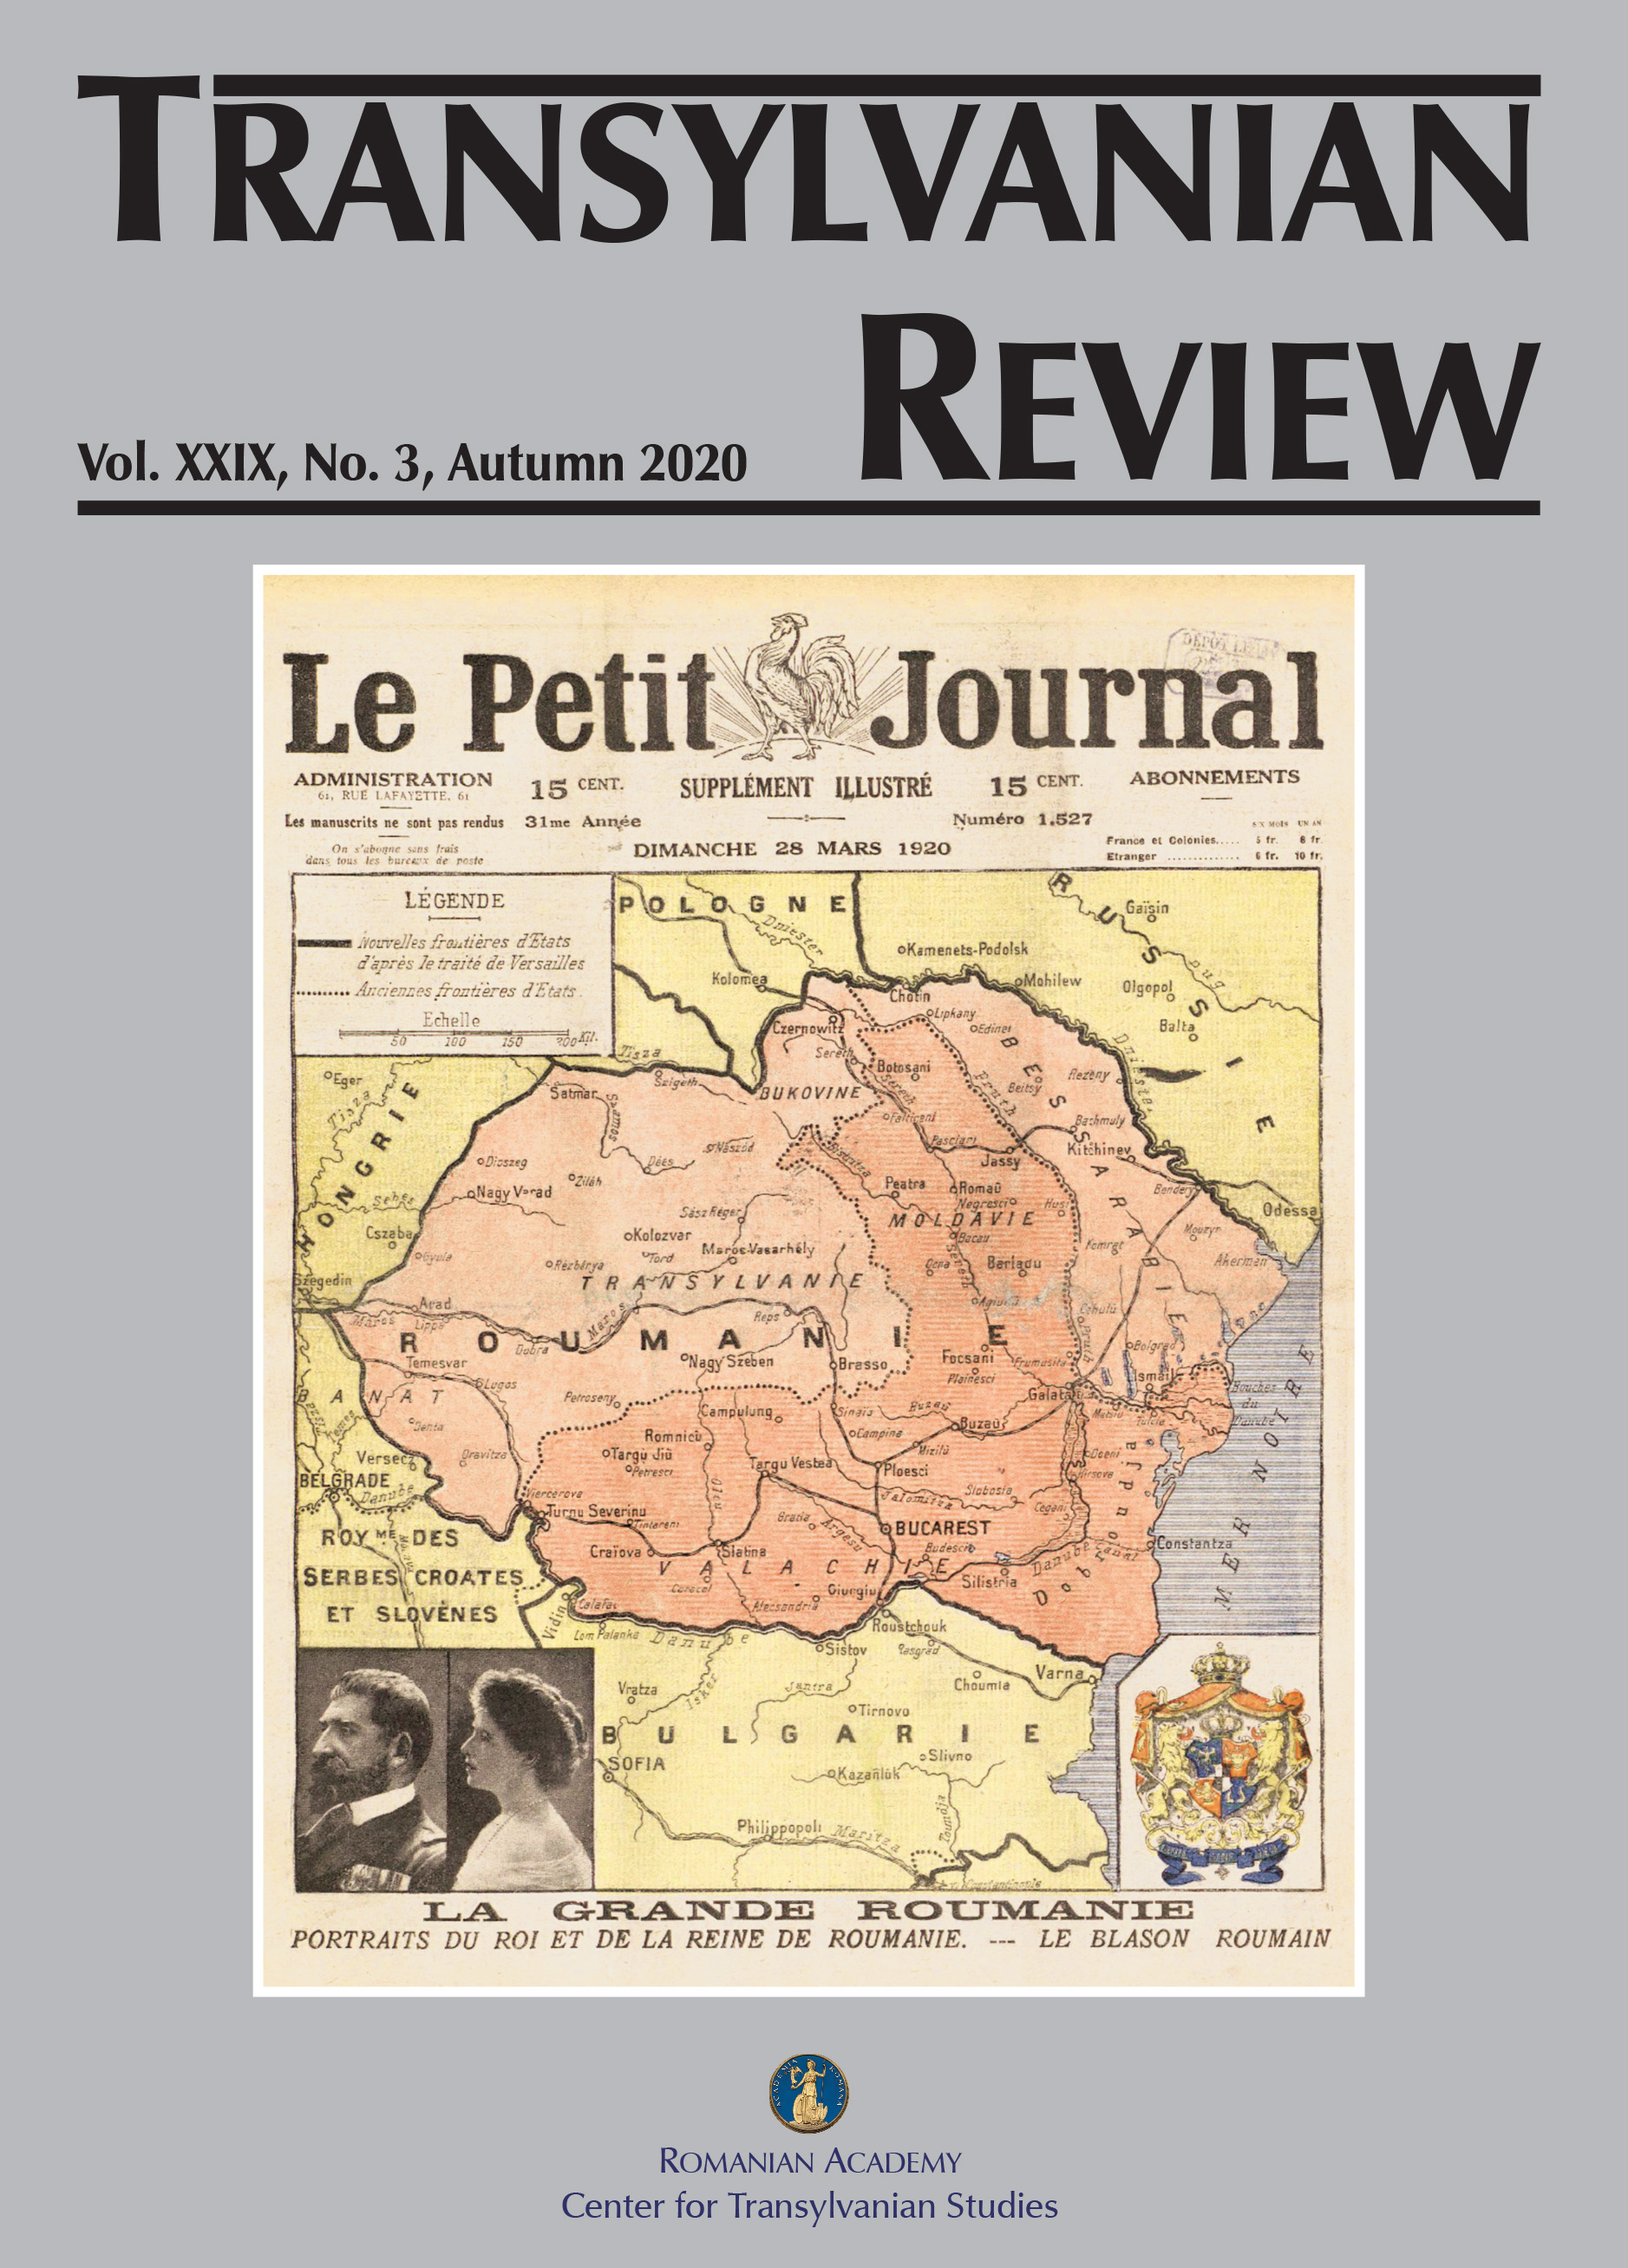 Direct Taxation Reform in Romania After the Great Union Cover Image